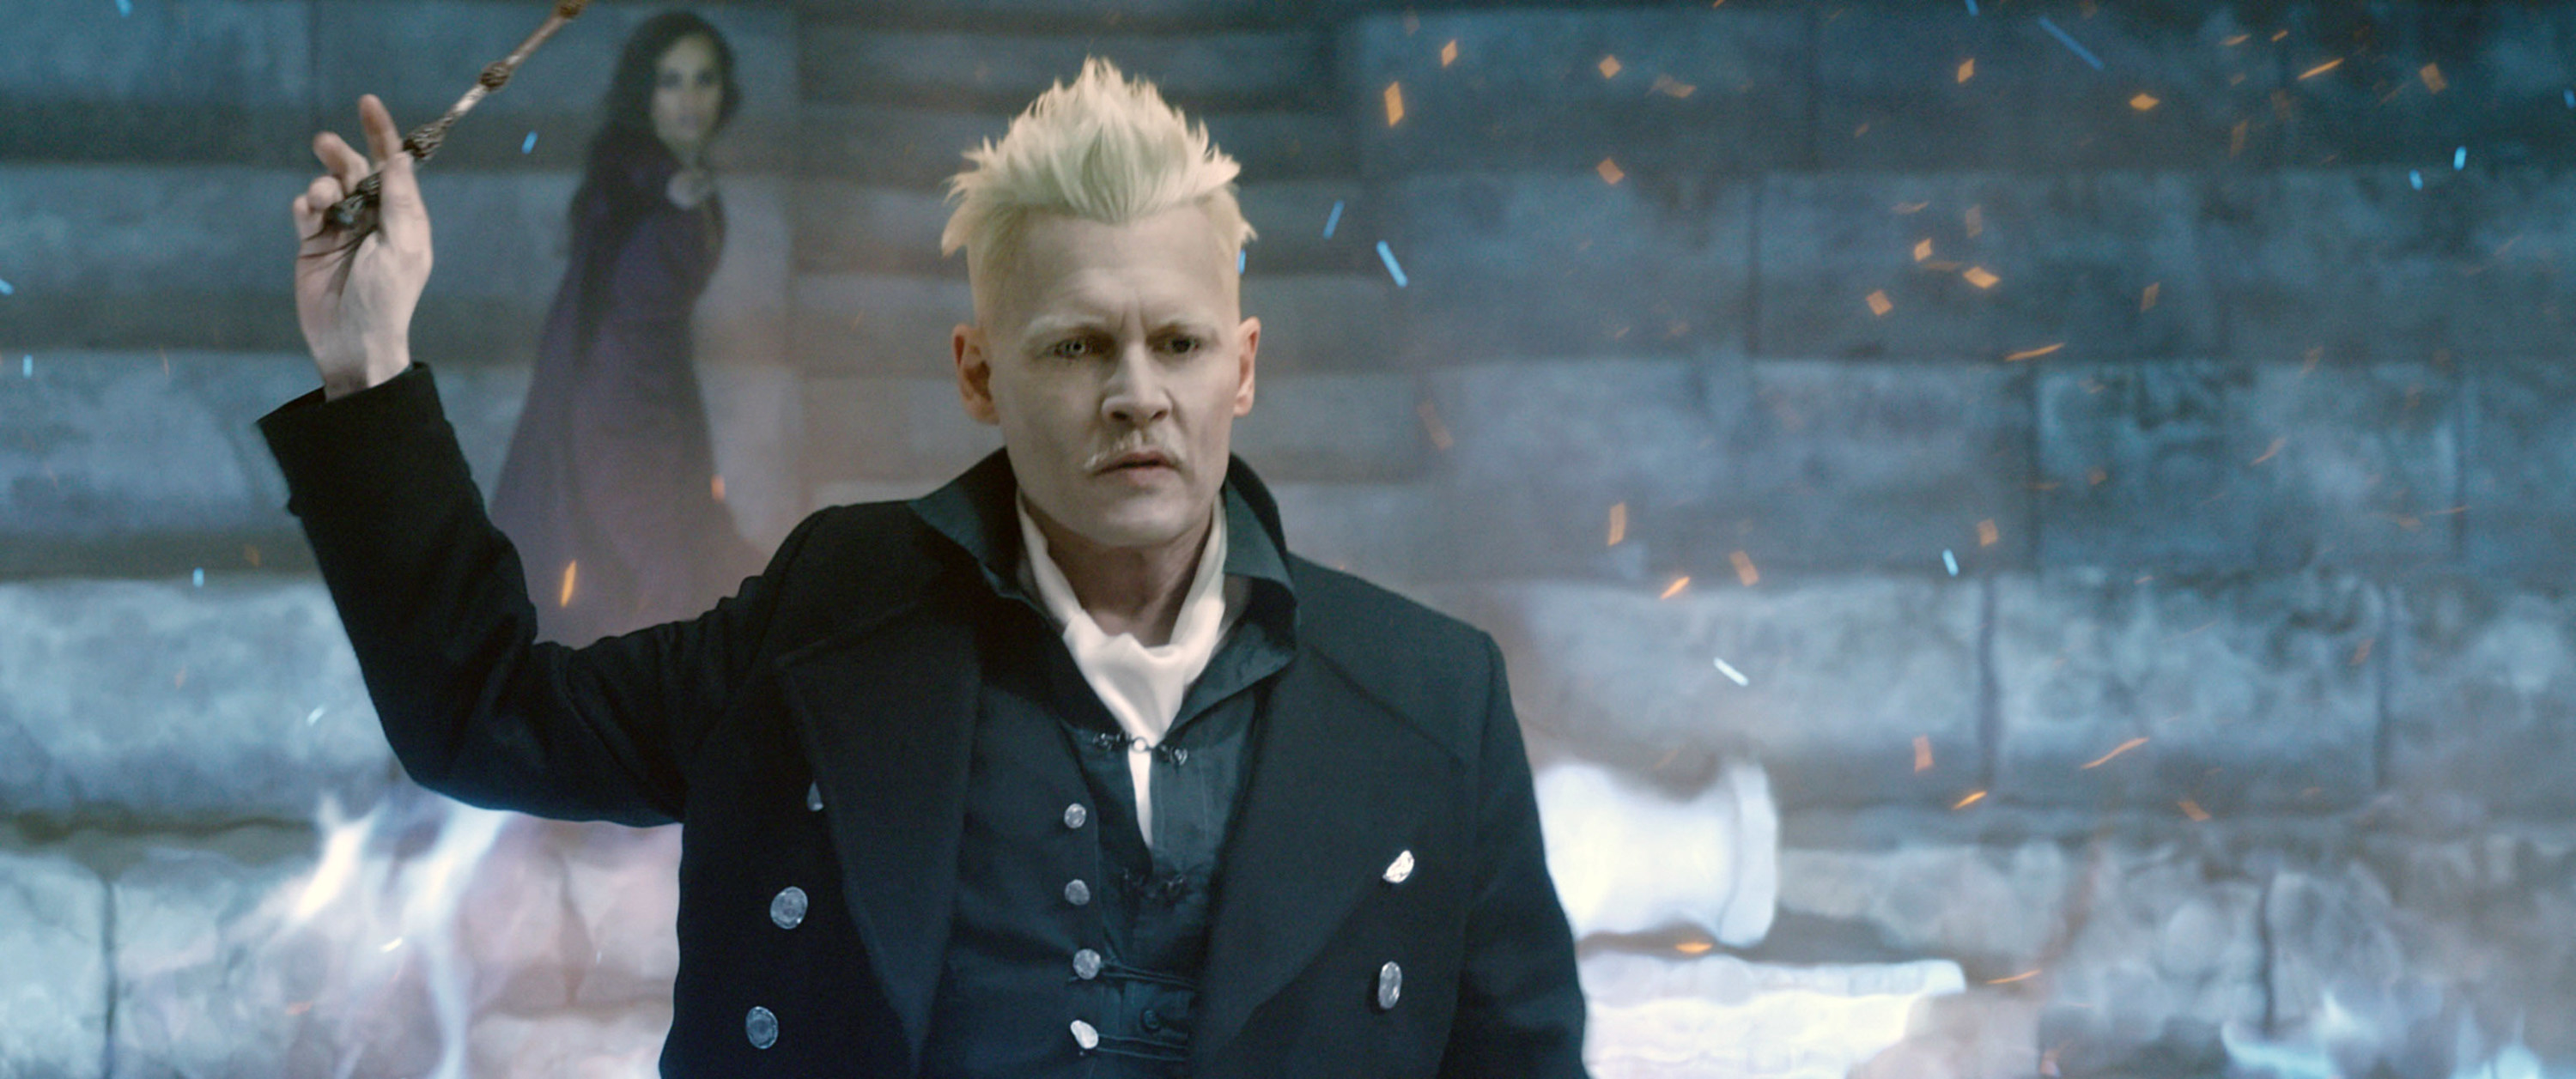 Grindelwald holding up his wand